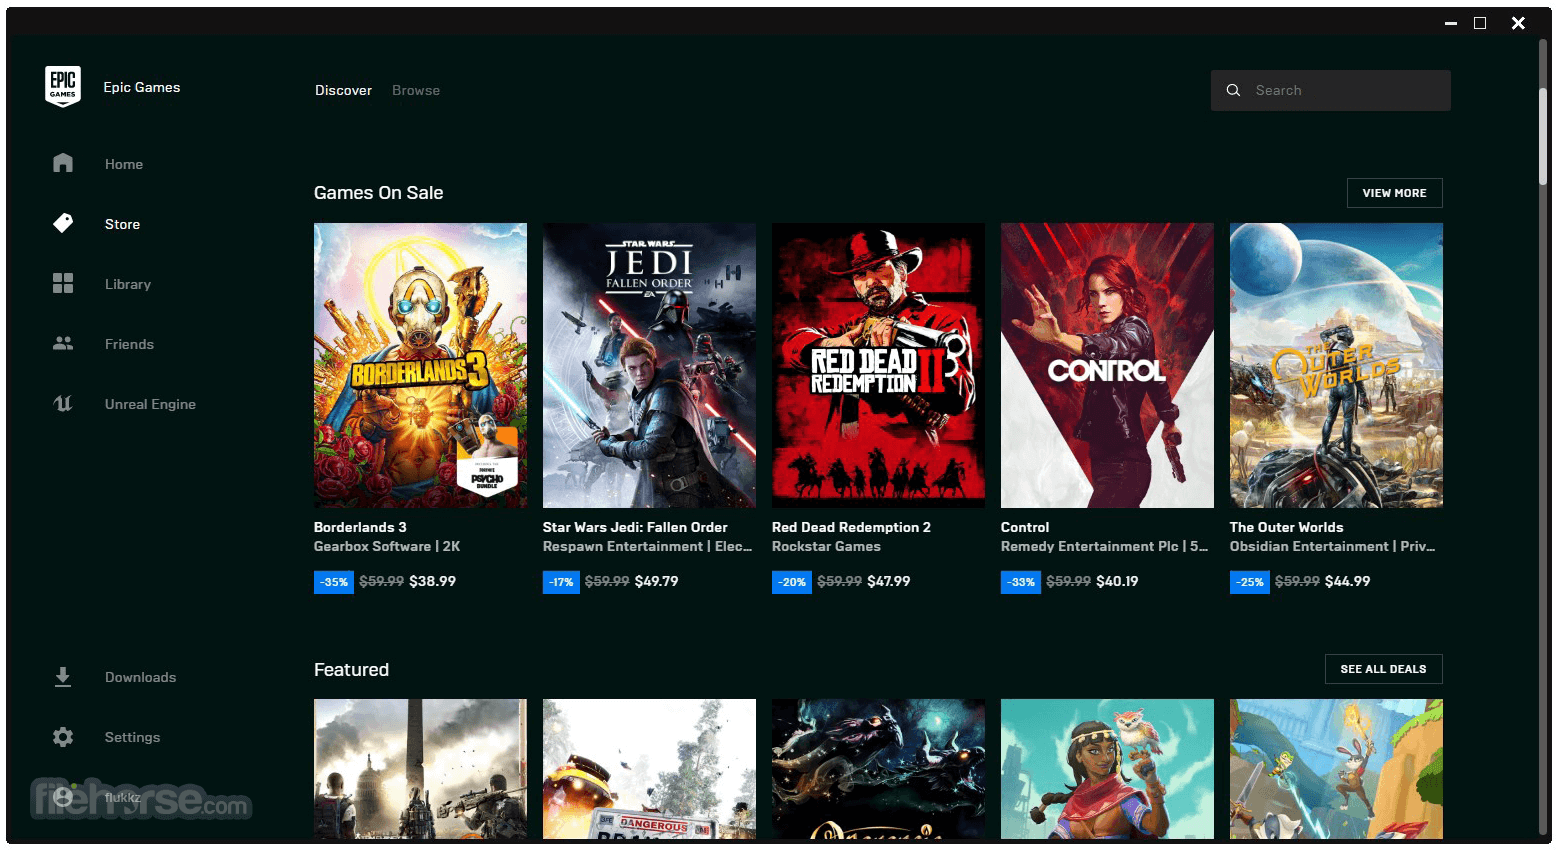 Download epic games launcher for pc talk now download free